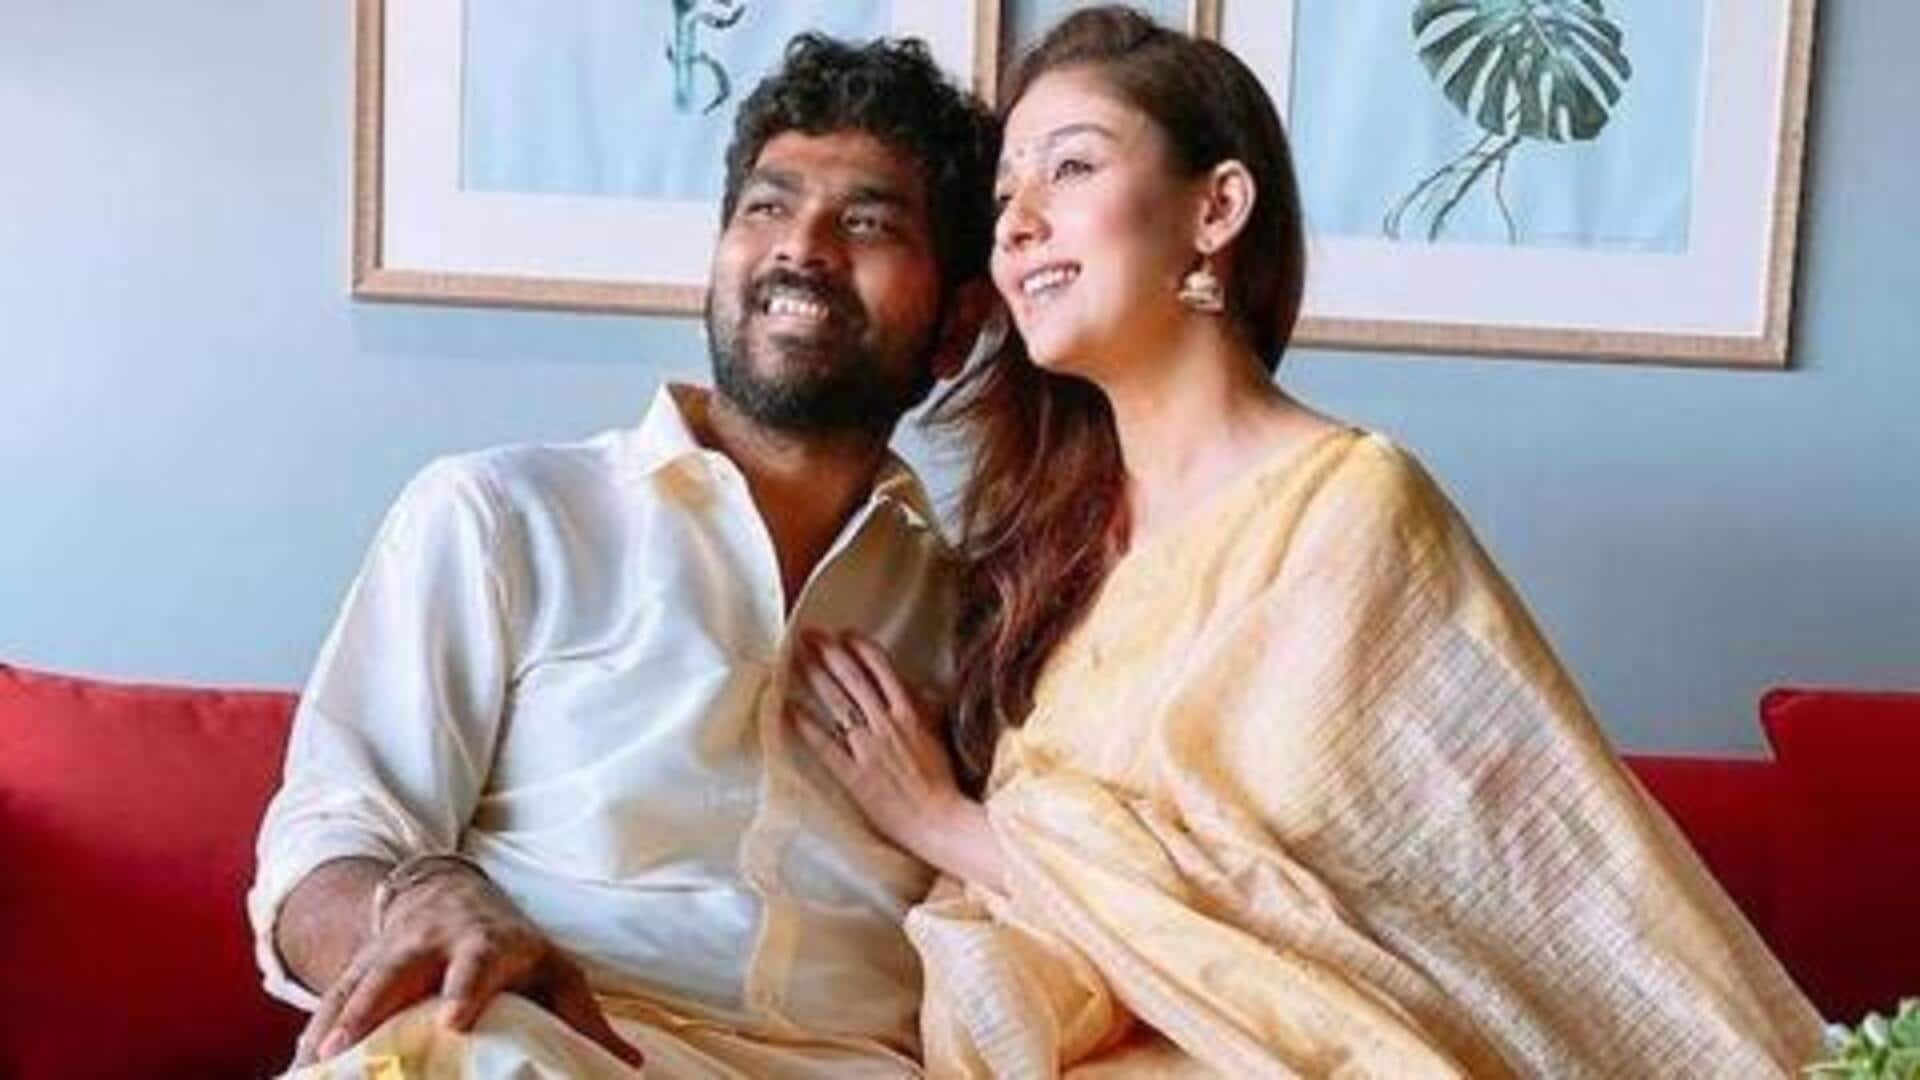 Nayanthara and Vignesh Shivan's fans are worried: Here's why